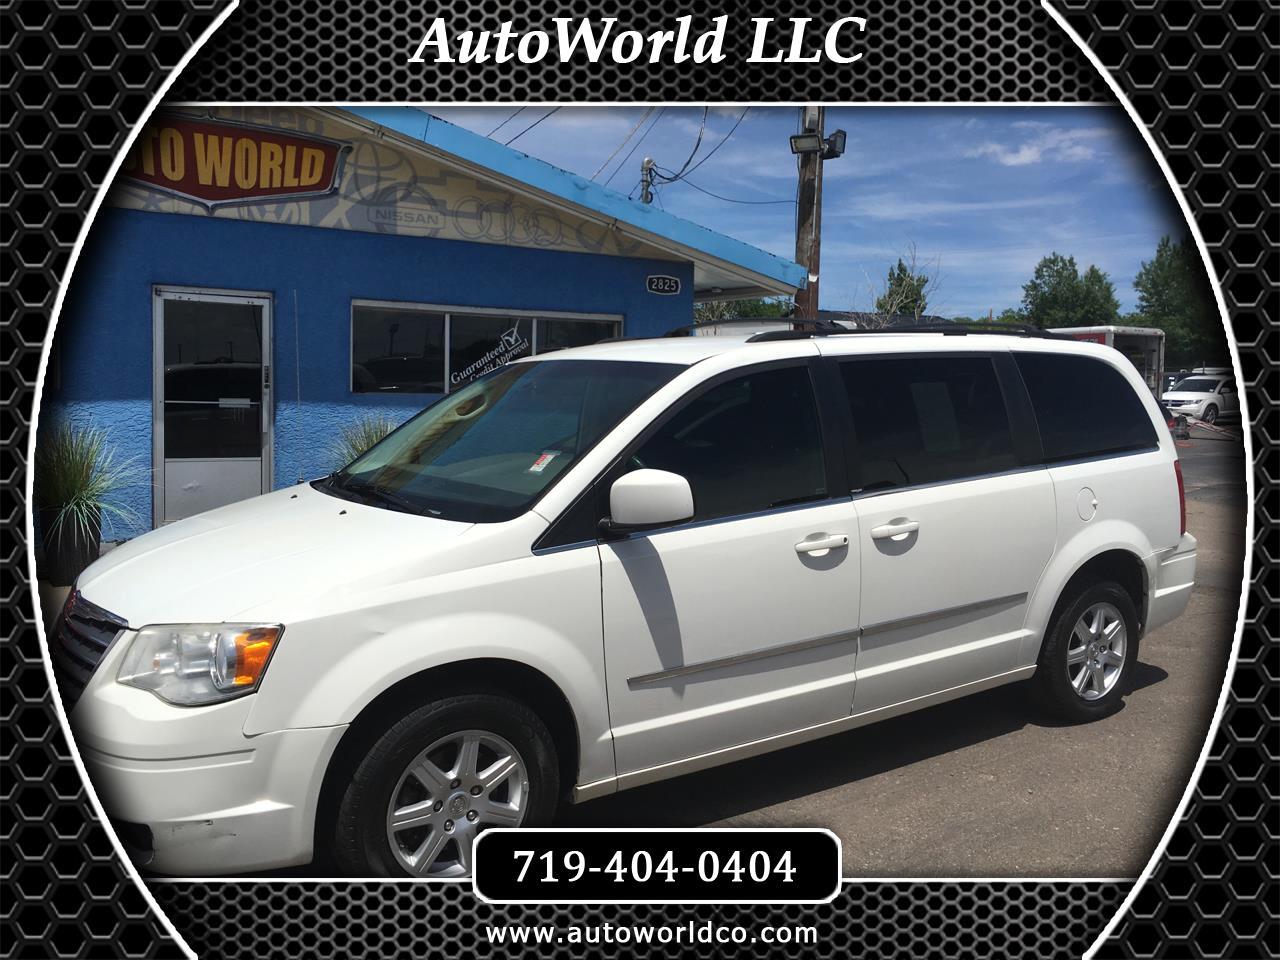 Used 2010 Chrysler Town & Country 4dr Wgn Touring for Sale in Pueblo CO ...